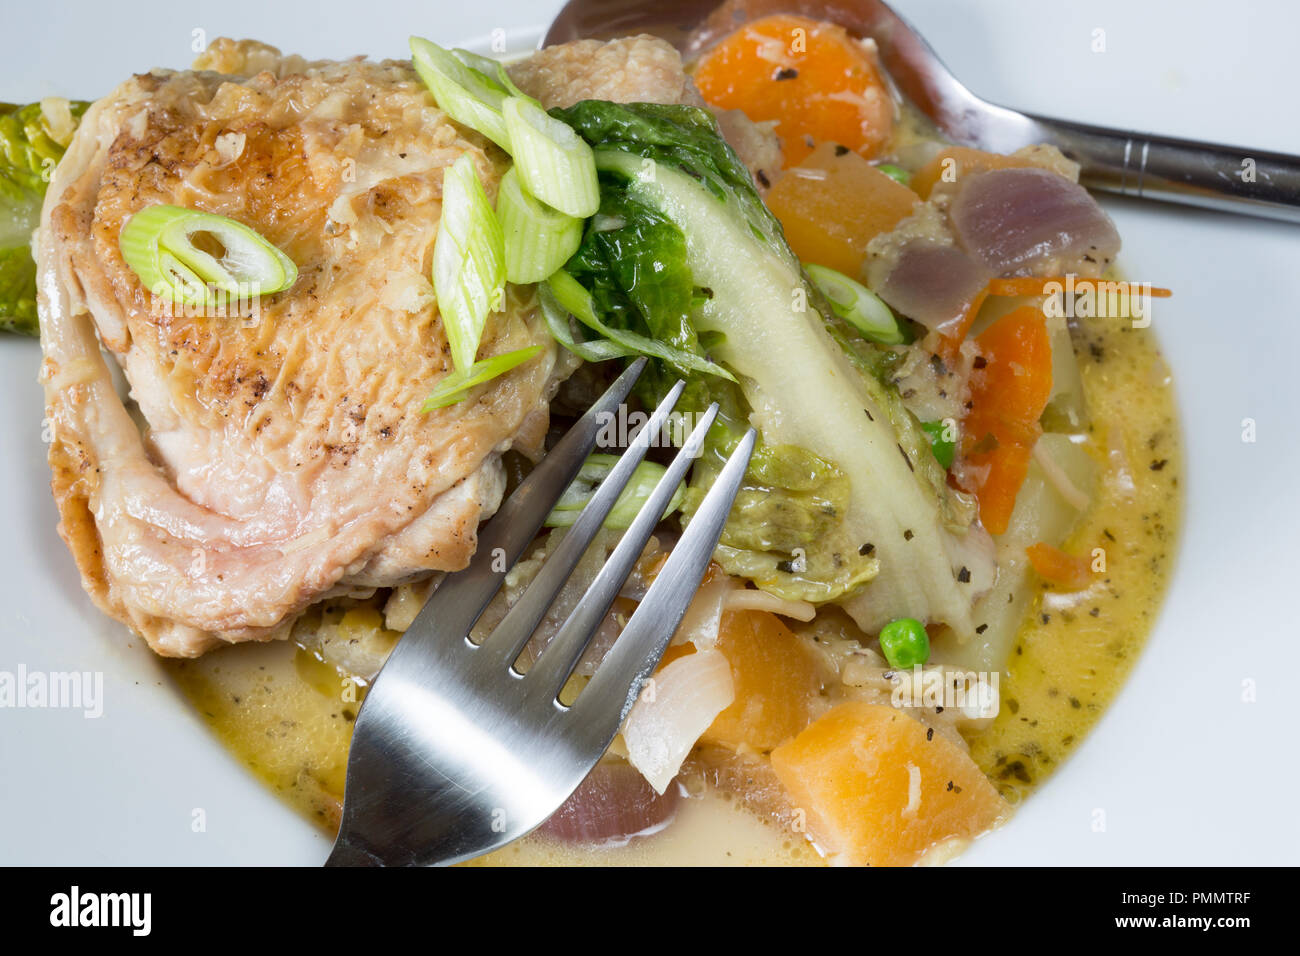 Braised Chicken and vegetable casserole. Stock Photo